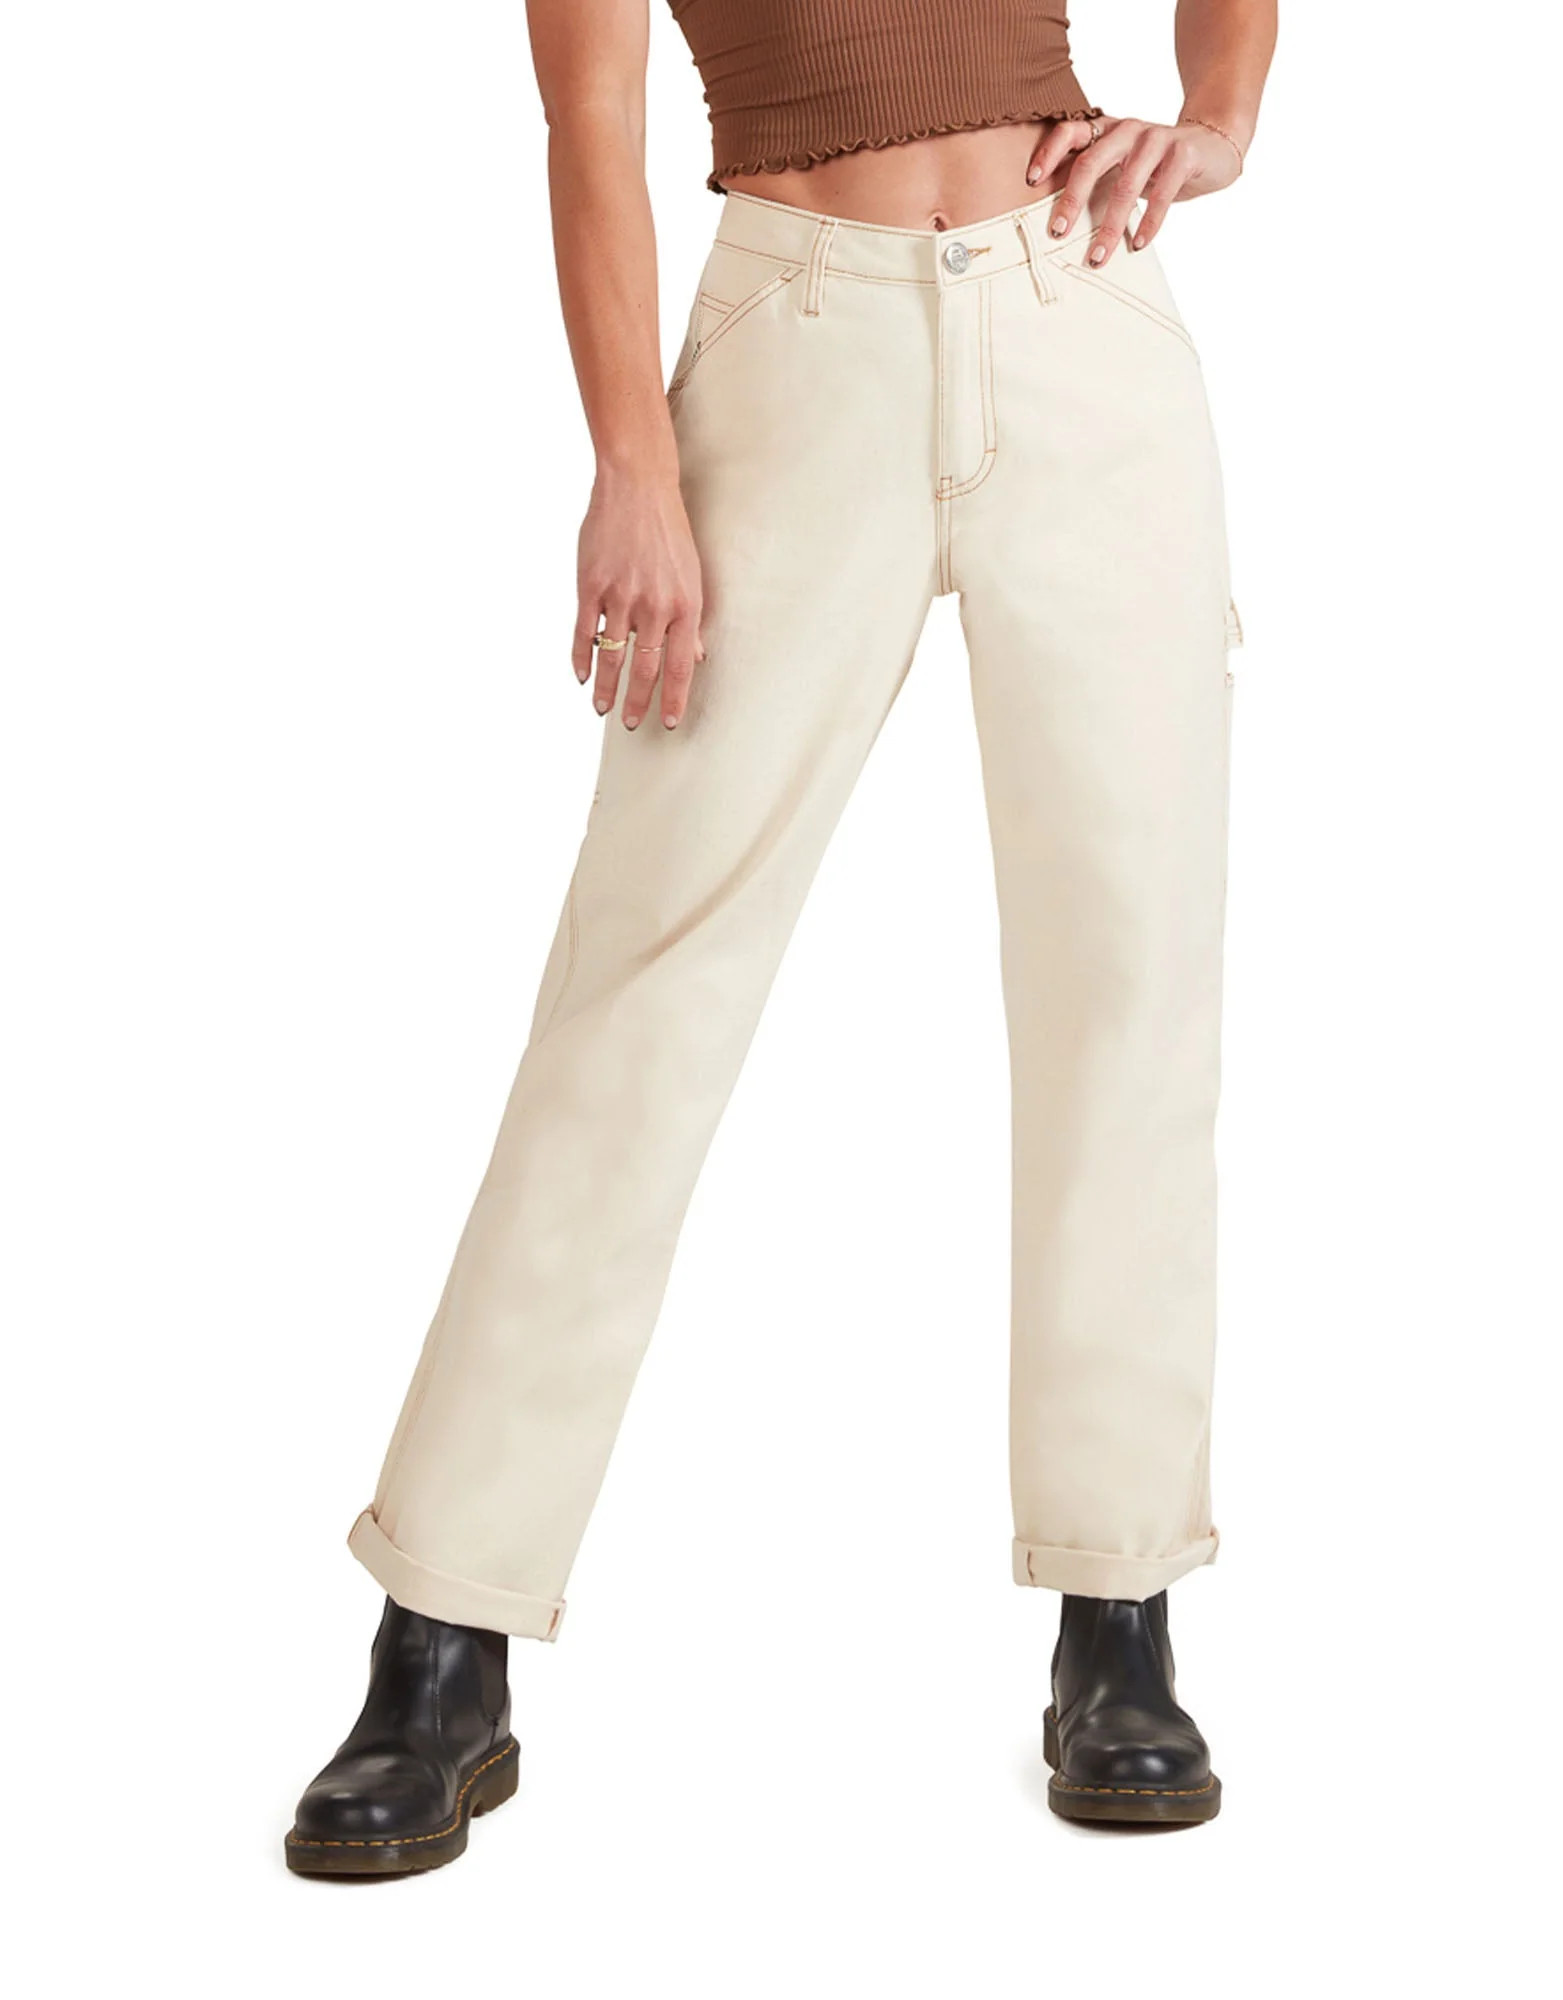 RELAXED FIT CARPENTER PANT (NATURAL) | Five Star General Pants